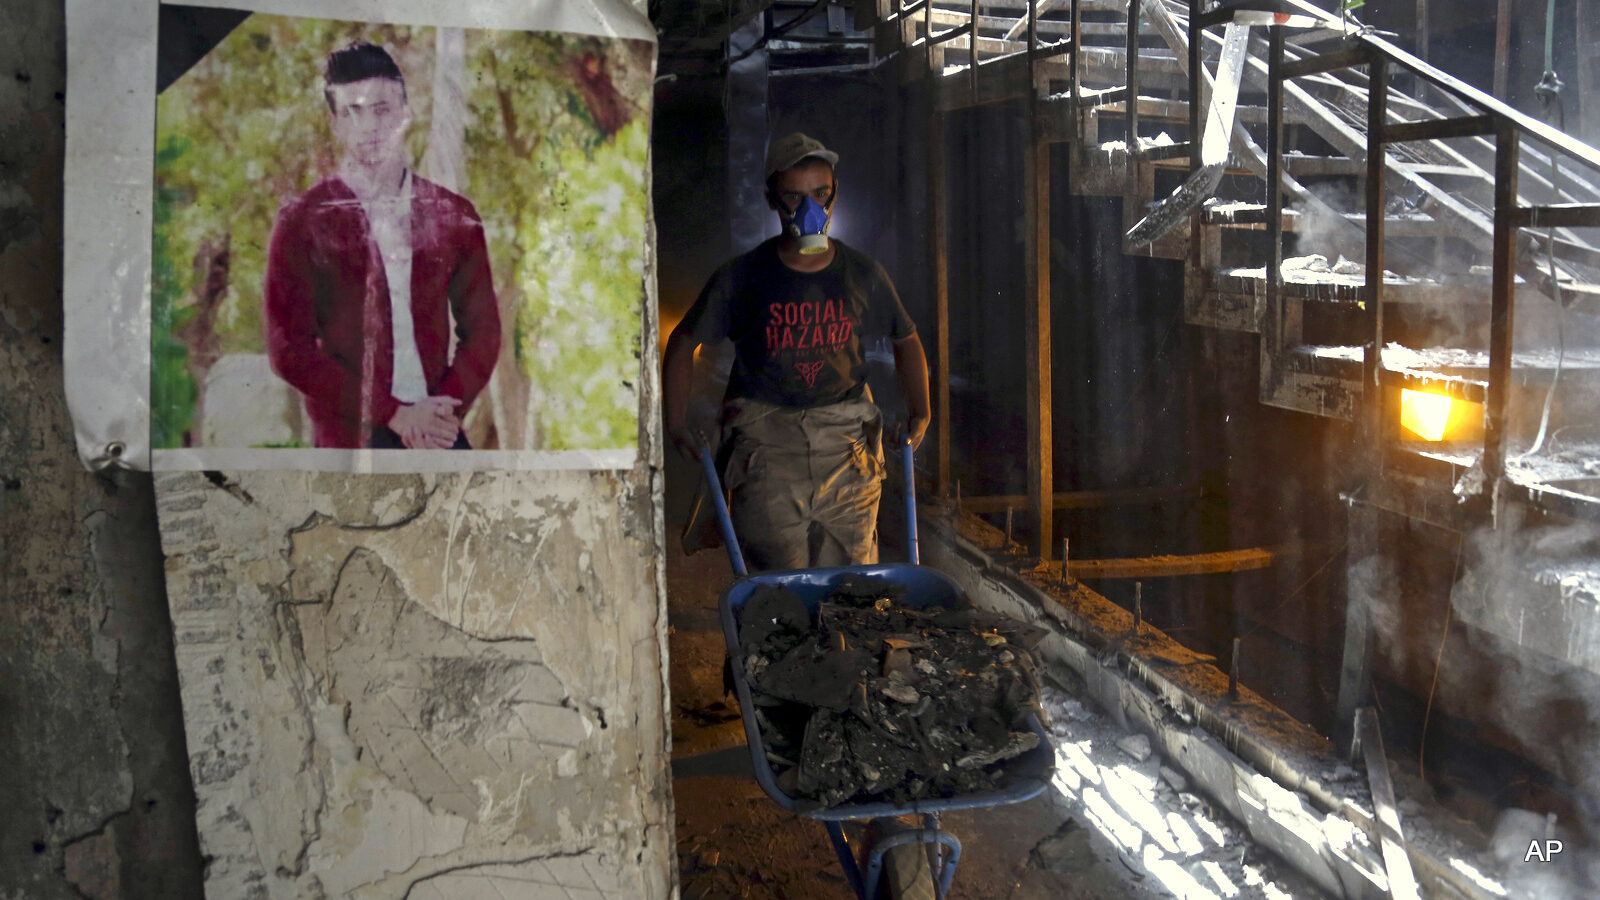 A municipal worker passes by a poster of a bomb victim during the cleaning process at the site of a deadly Islamic State group-claimed mall bombing in the Karradah neighborhood of central Baghdad, Iraq, Sunday, Aug. 21, 2016. The scene of the blast that ultimately claimed the lives of nearly 300 people, according to the ministry of health, sat as a memorial to the dead for weeks after the attack. The July 3 attack was the single deadliest bombing in Baghdad since the 2003 toppling of Saddam Hussein and it fueled anger toward the Iraqi government over the lack of security in the capital.